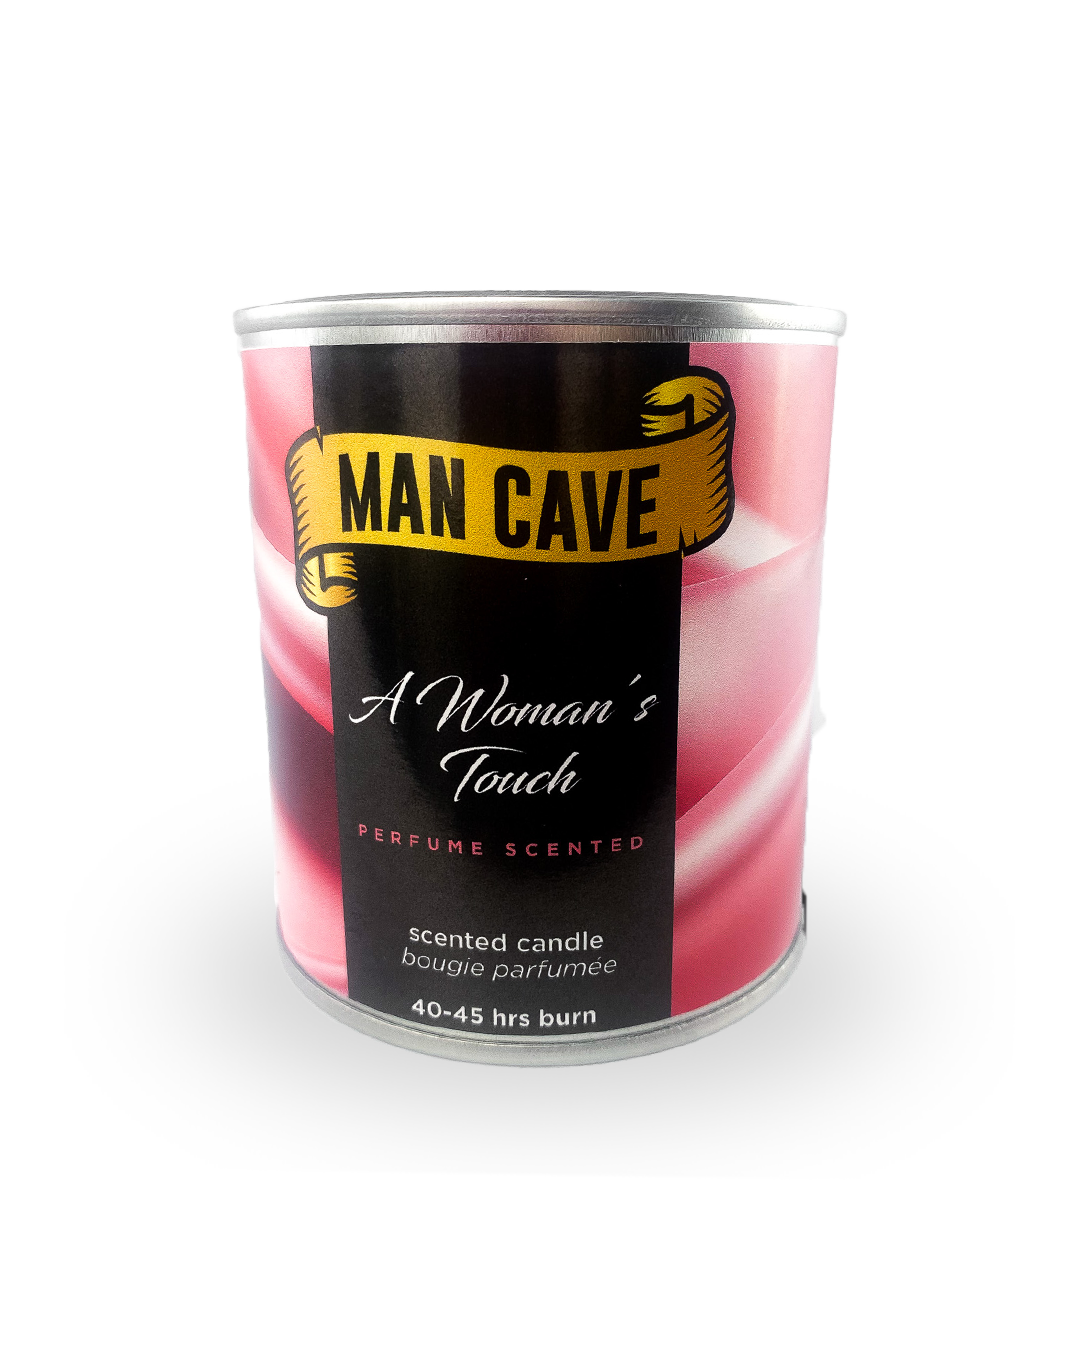 A Woman's Touch - Perfume Scented Candle